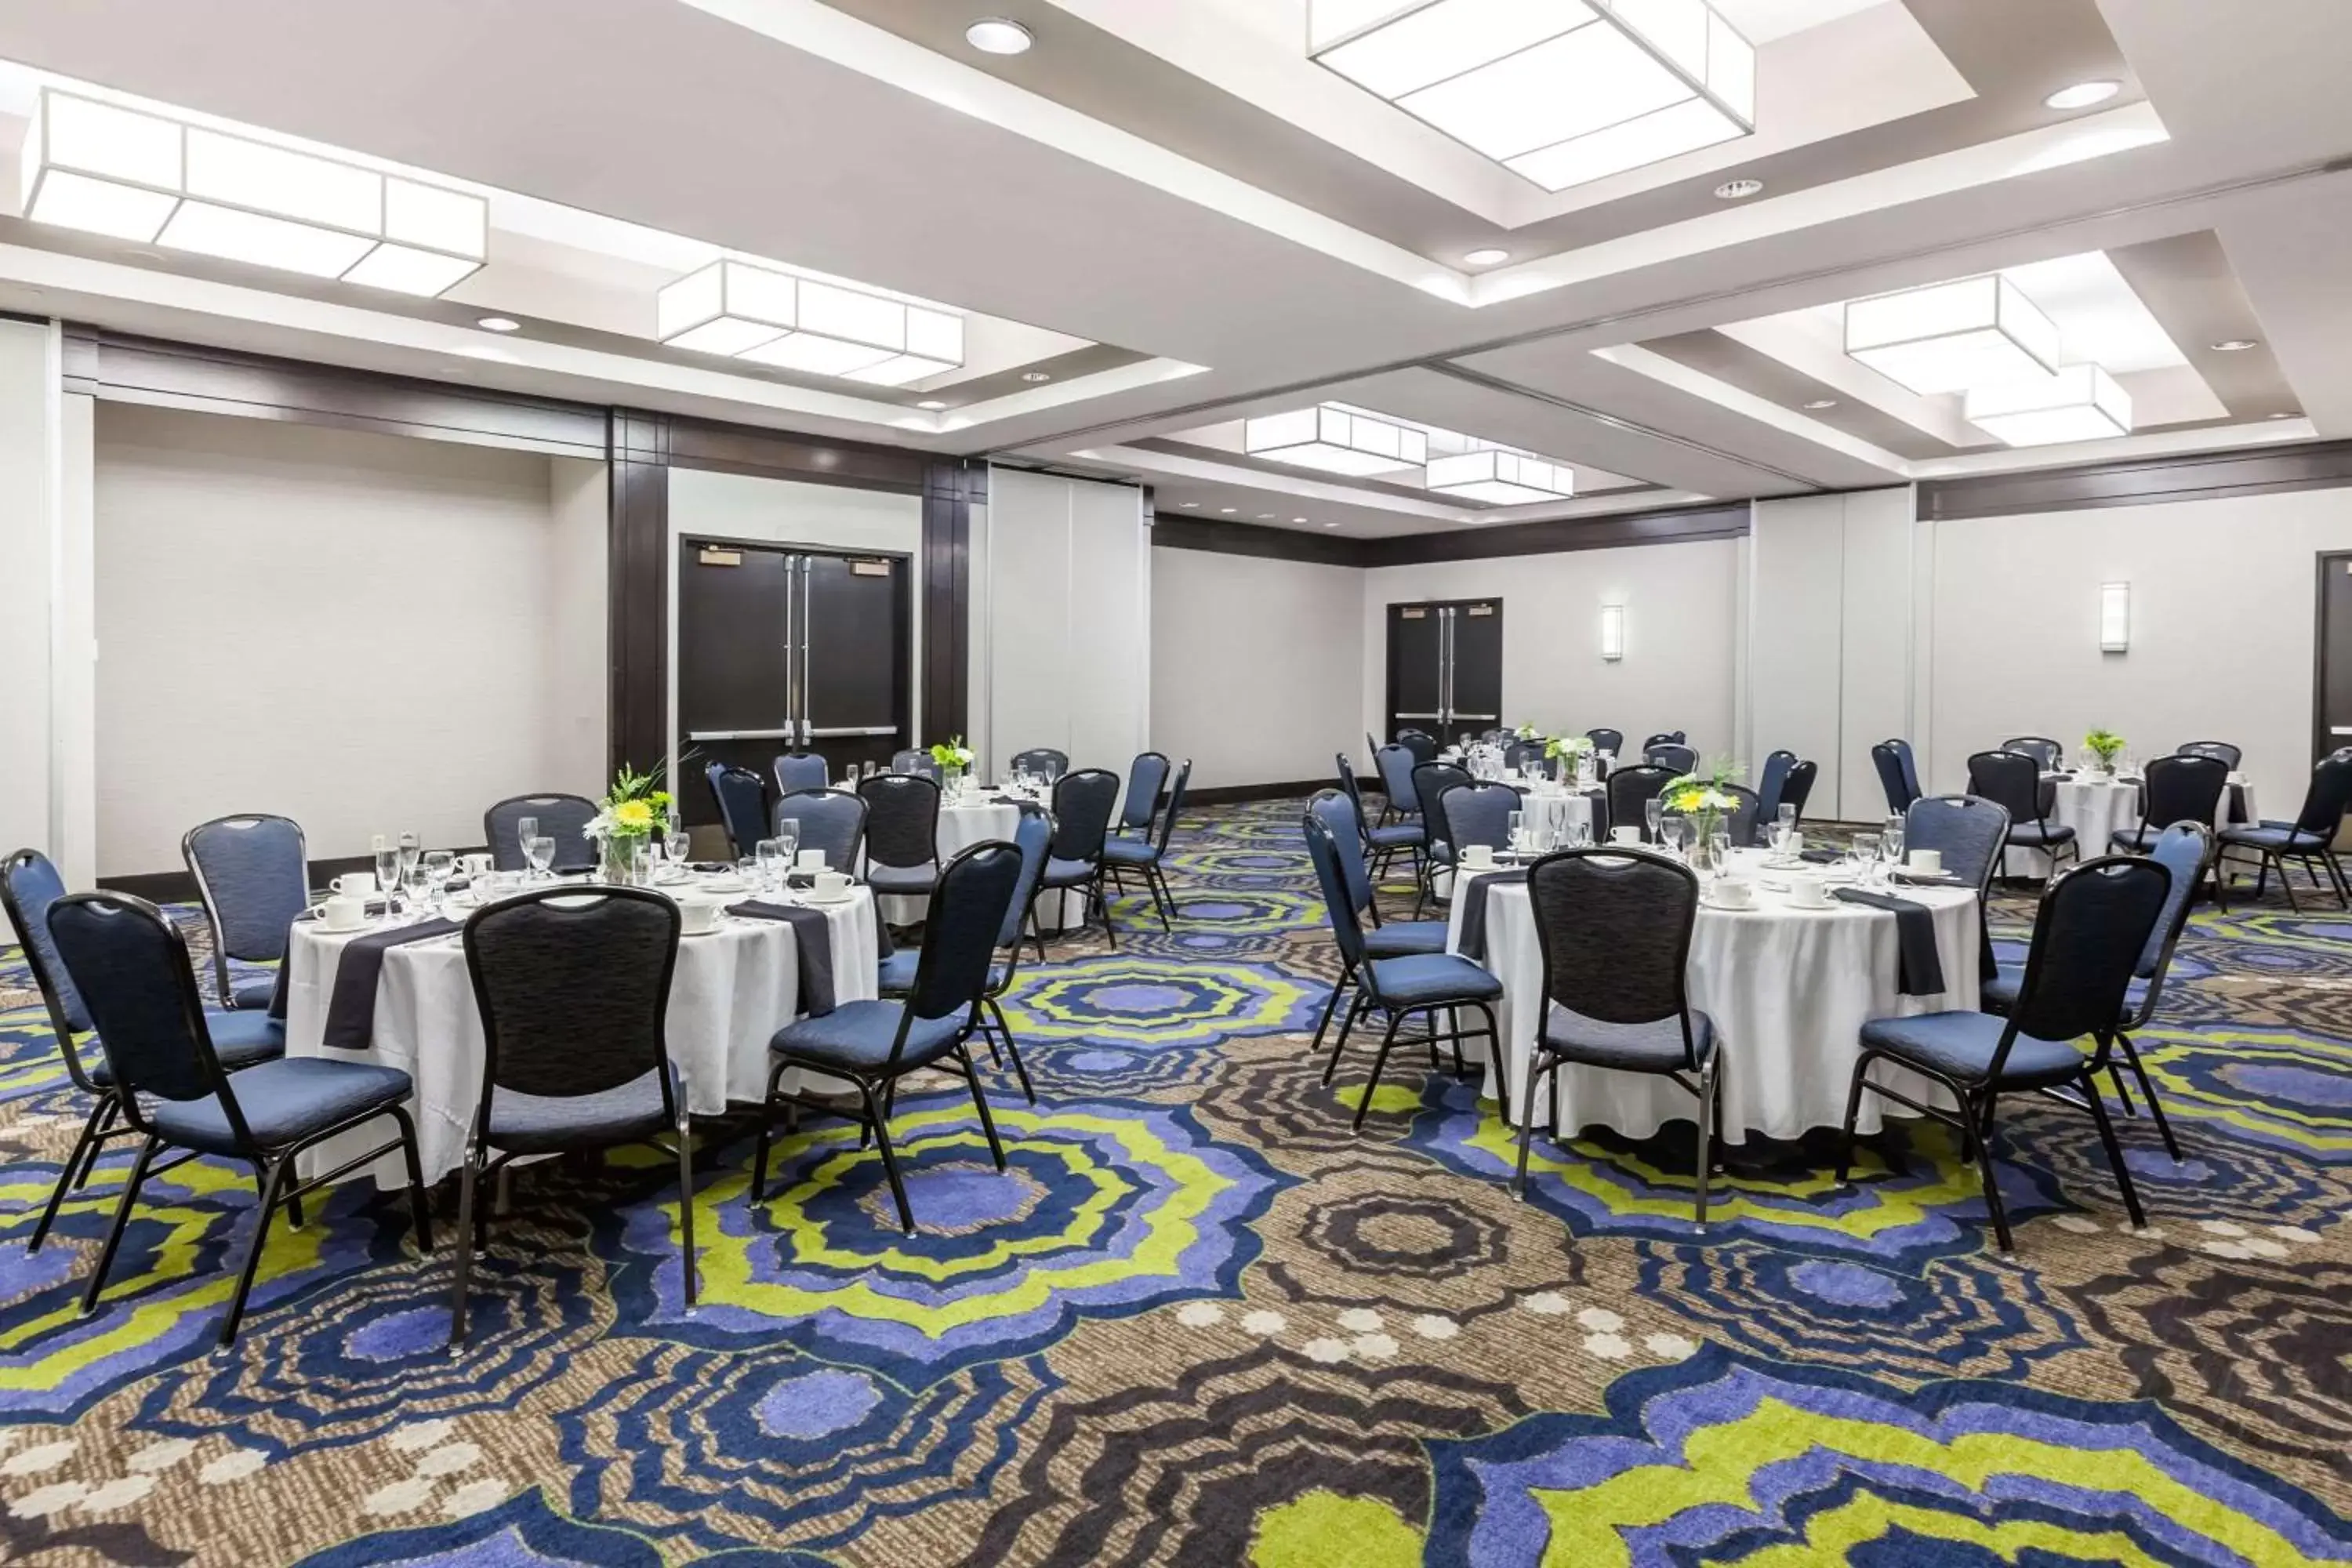 On site, Banquet Facilities in Wyndham Pittsburgh University Center